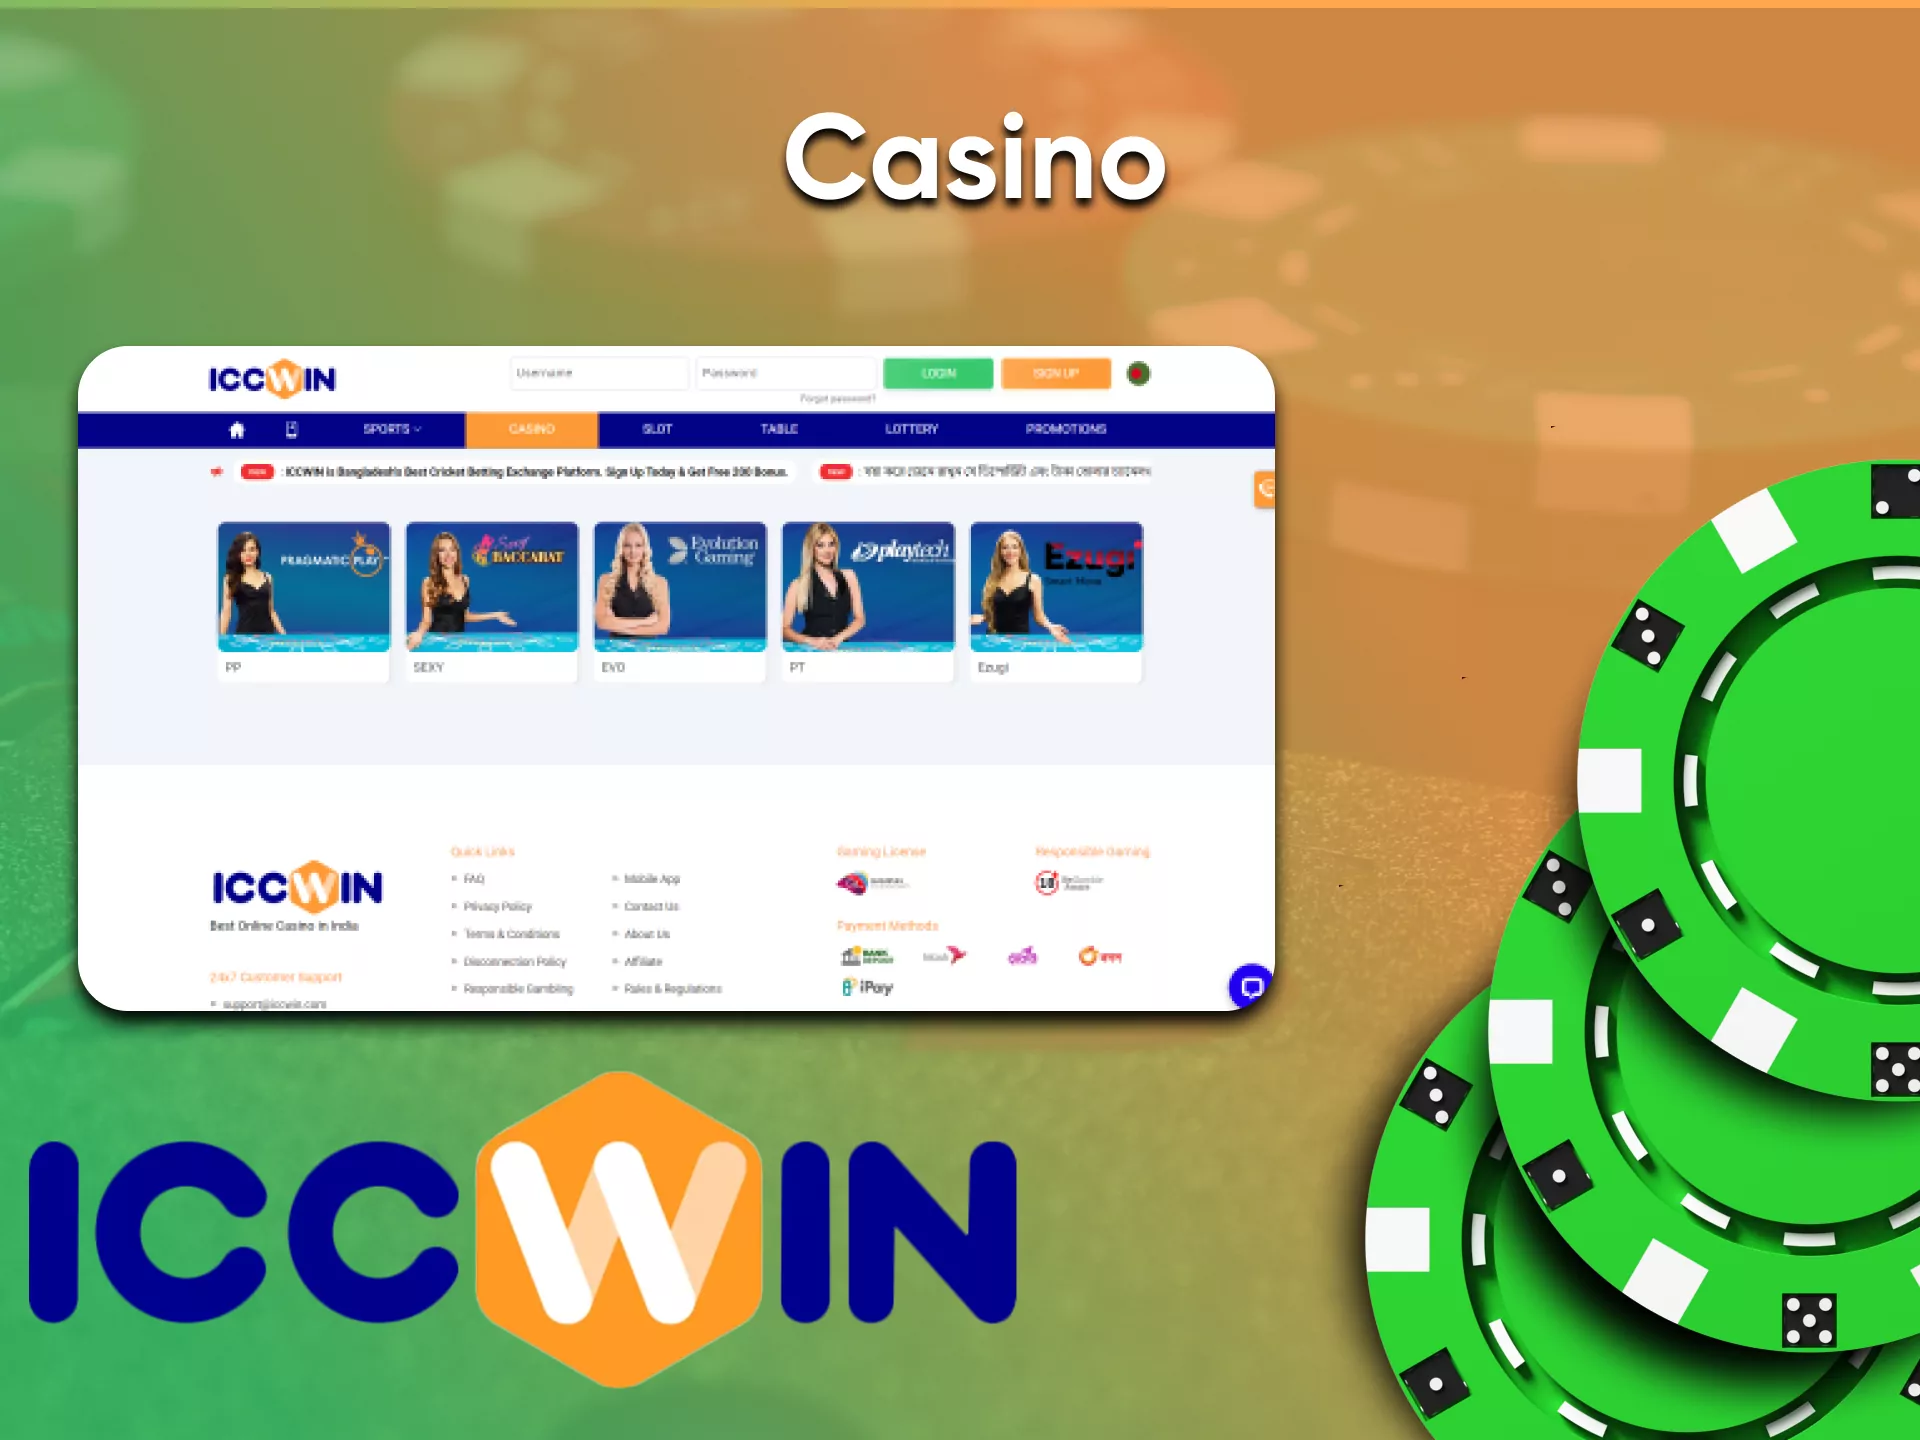 Go to the desired section on the site for casino games from ICCWin.